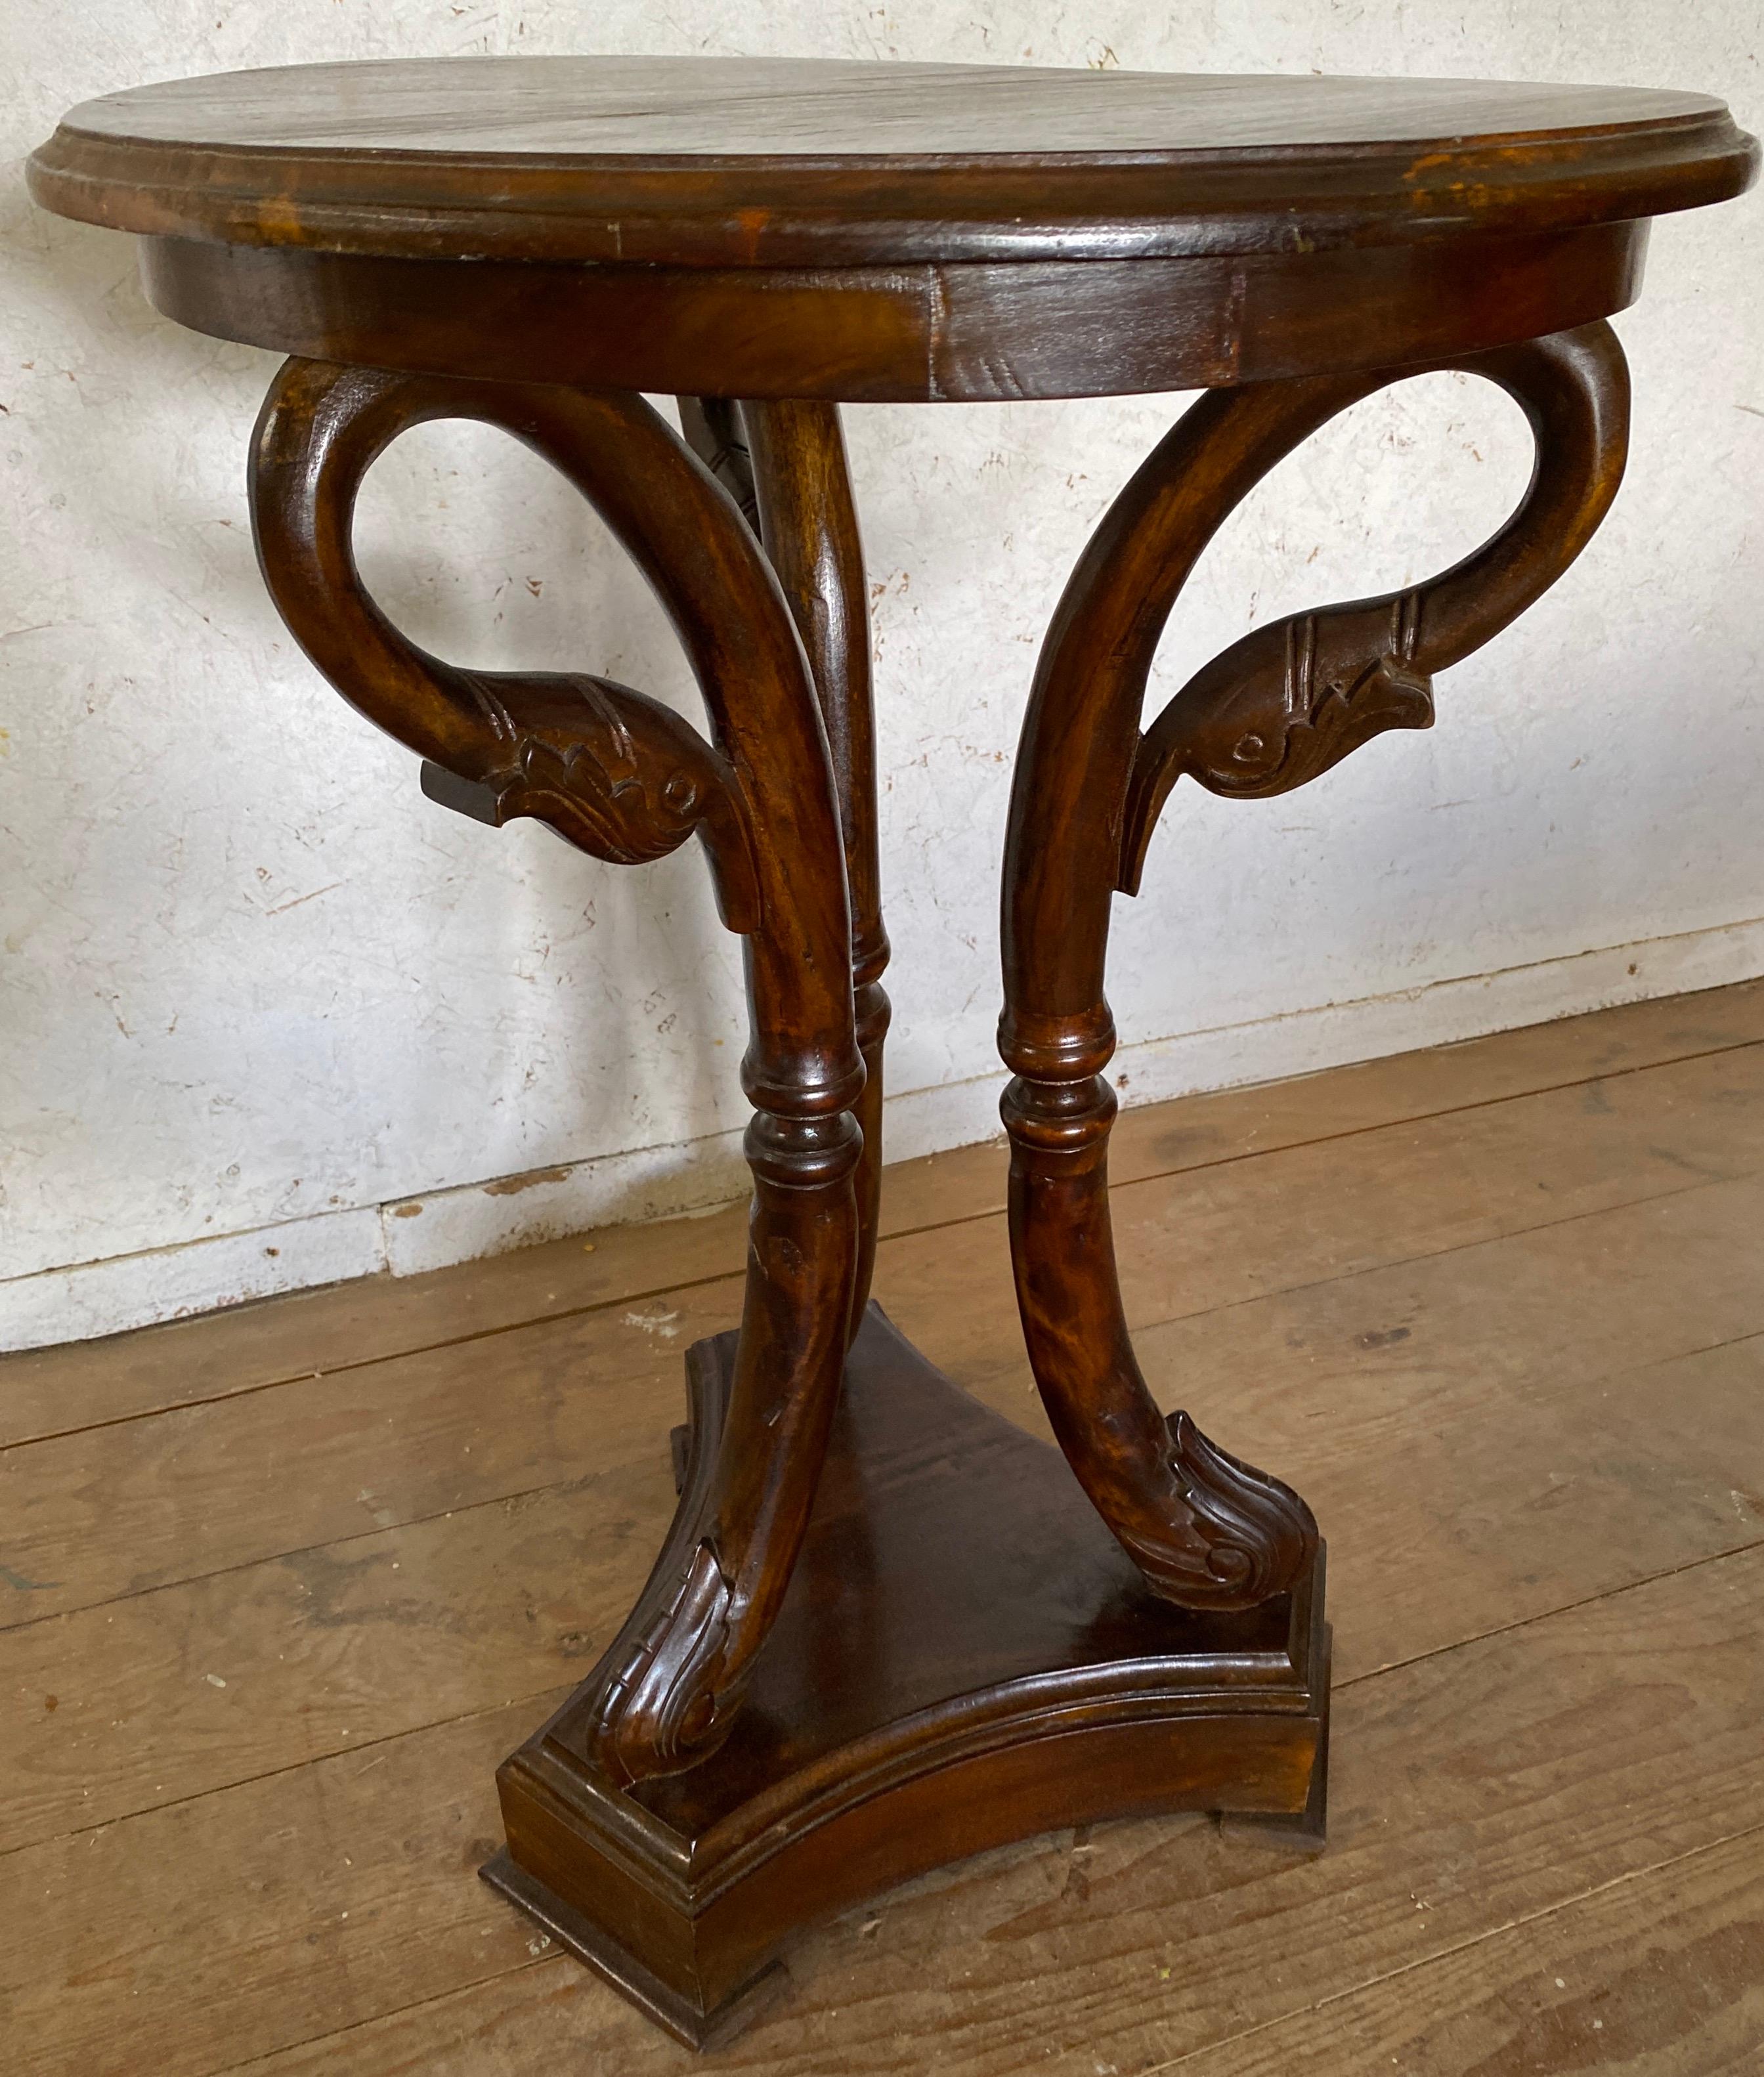 antique swan table